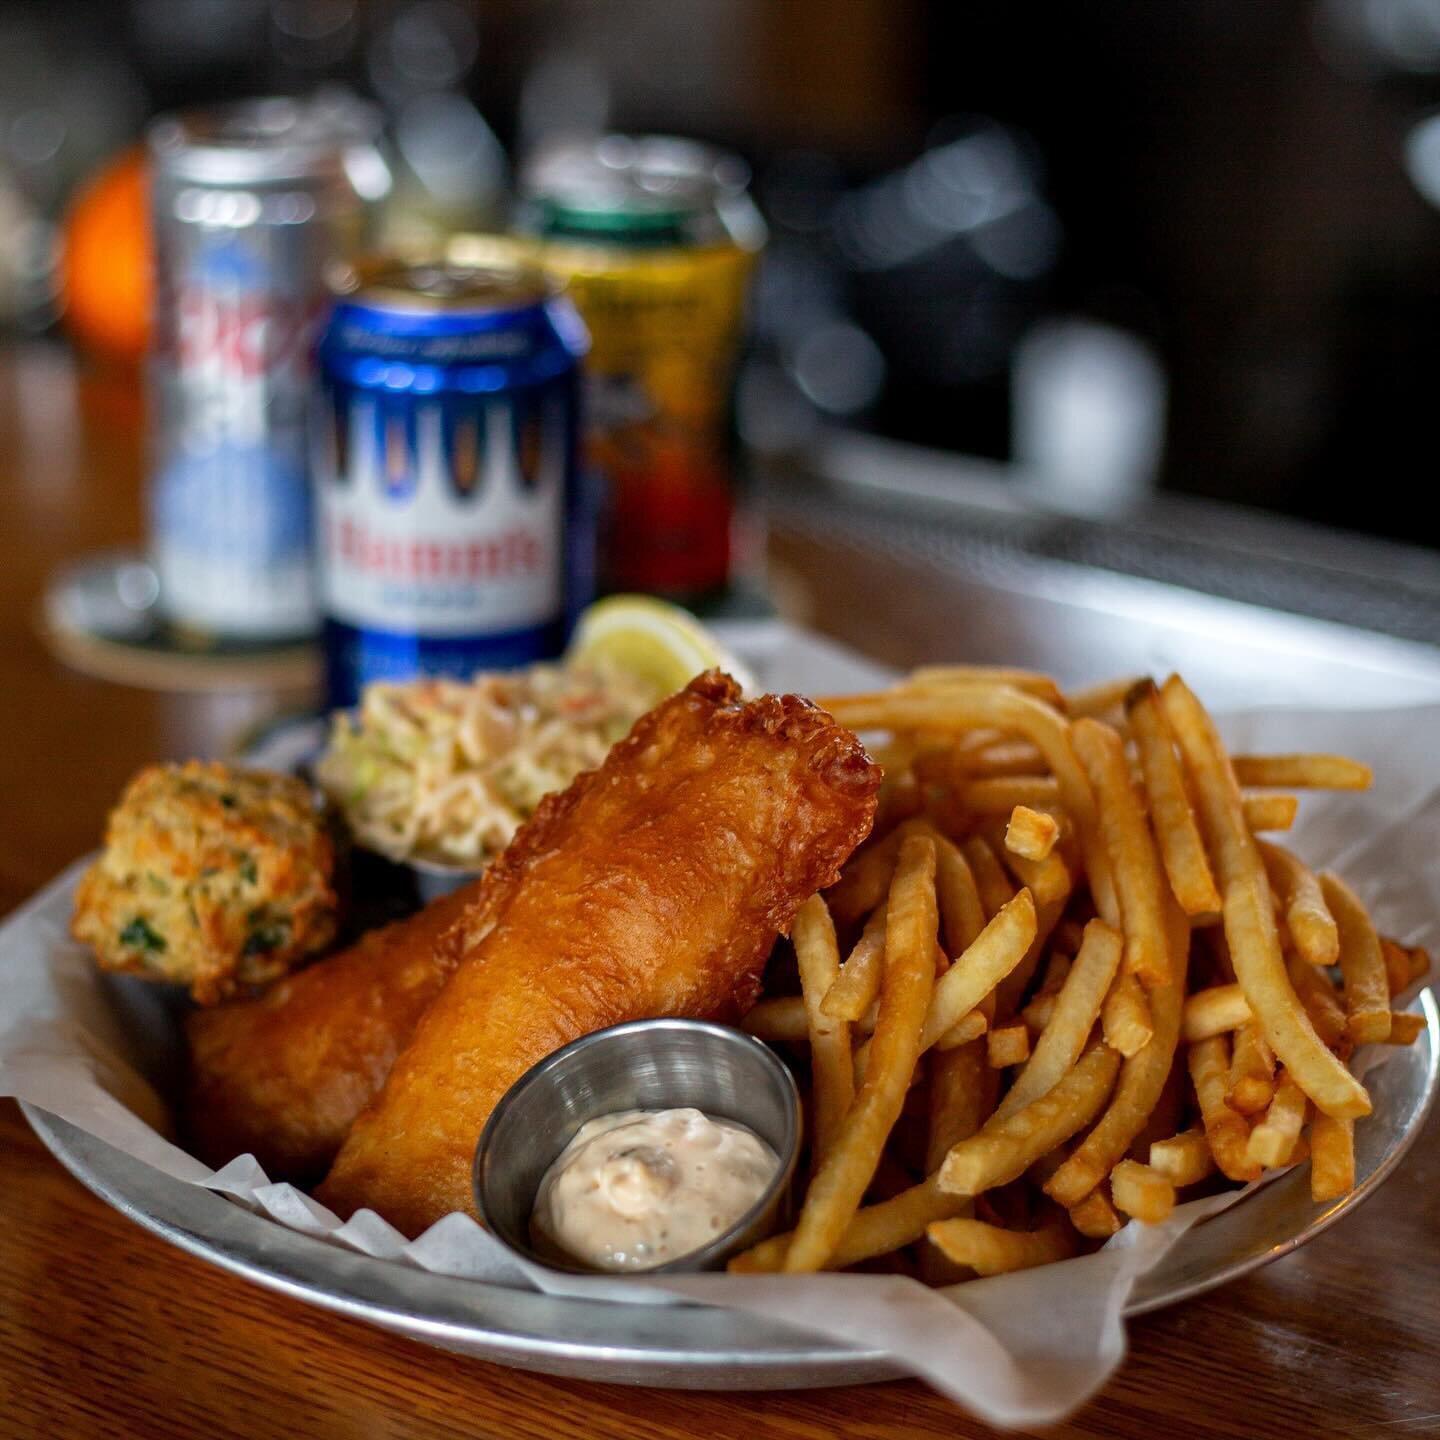 TGIT! 🎣 
Tonight is our first Fish Fry Tuesday! Walk on in and grab a bar seat or join friends at one of our tables in Cherry Valley! 
🍻 
BOGO BEERS! Every Tuesday! That&rsquo;s right, all beers are BOGO! Can&rsquo;t beat that! 
#fishfry #madisonwi